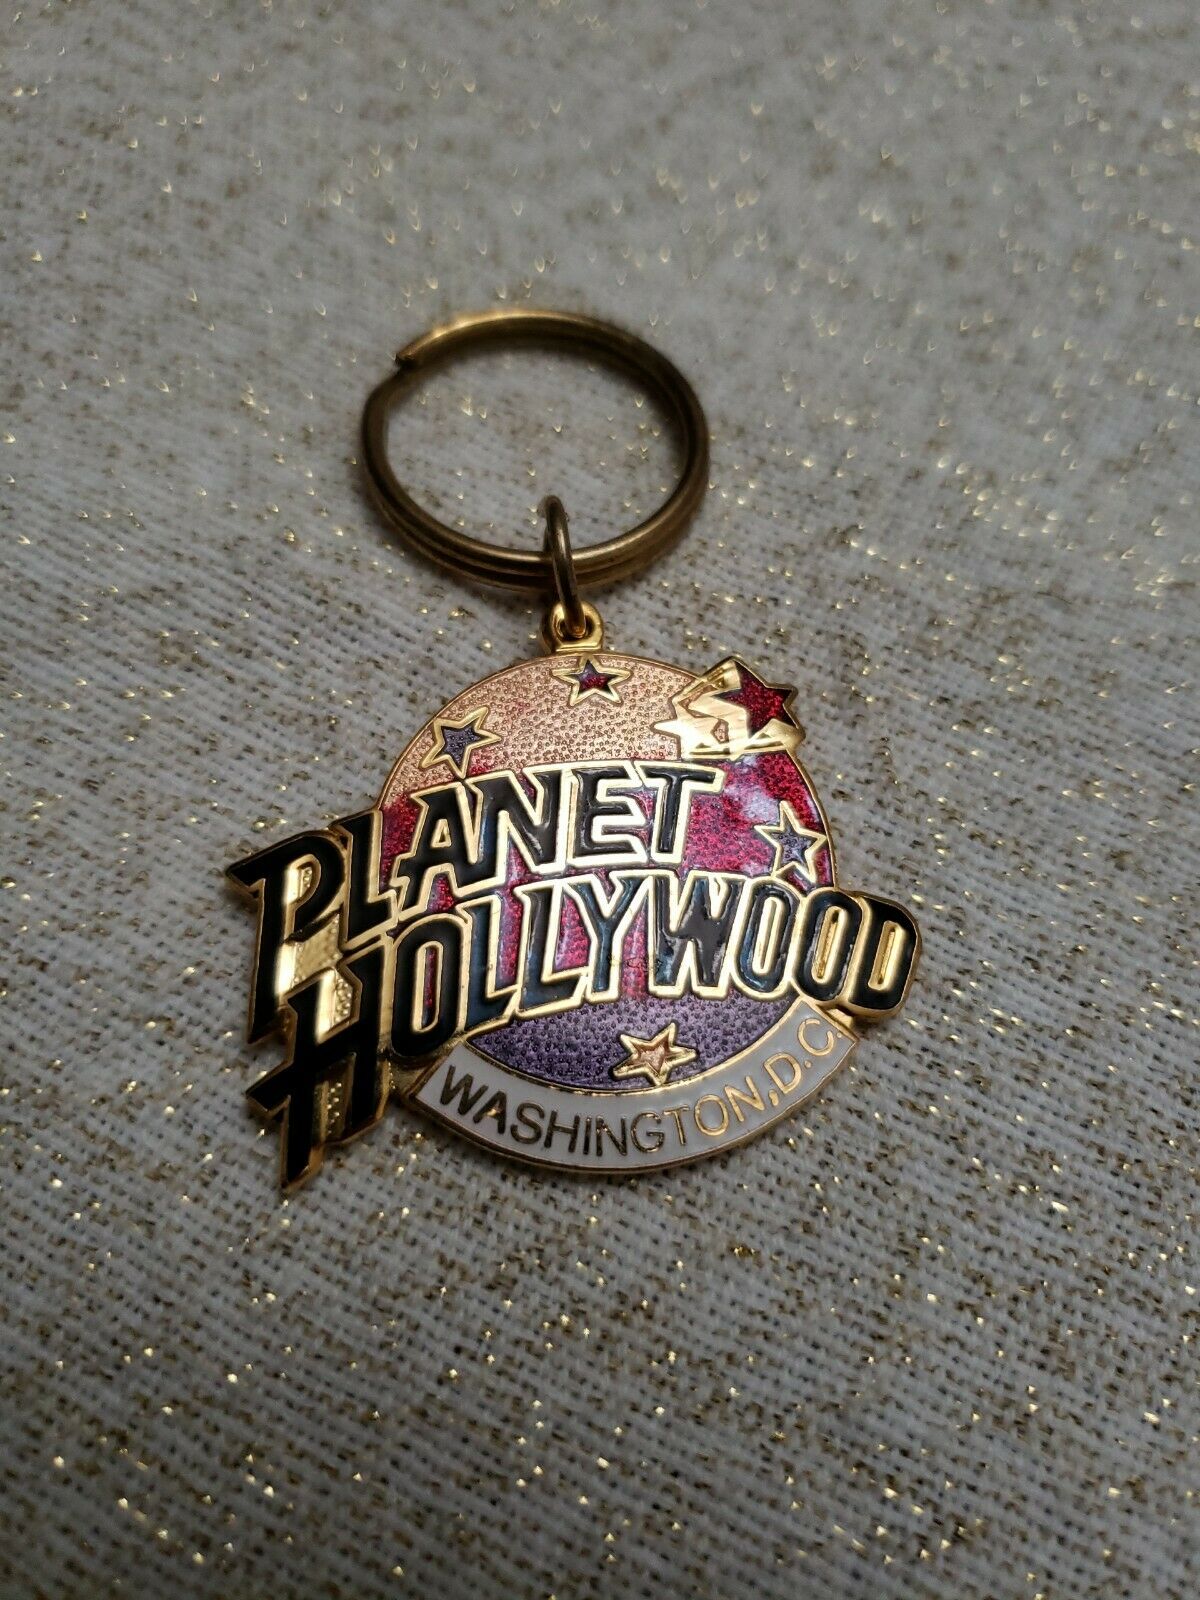 Planet Hollywood Keychain Washington D.c. Trading Collector New